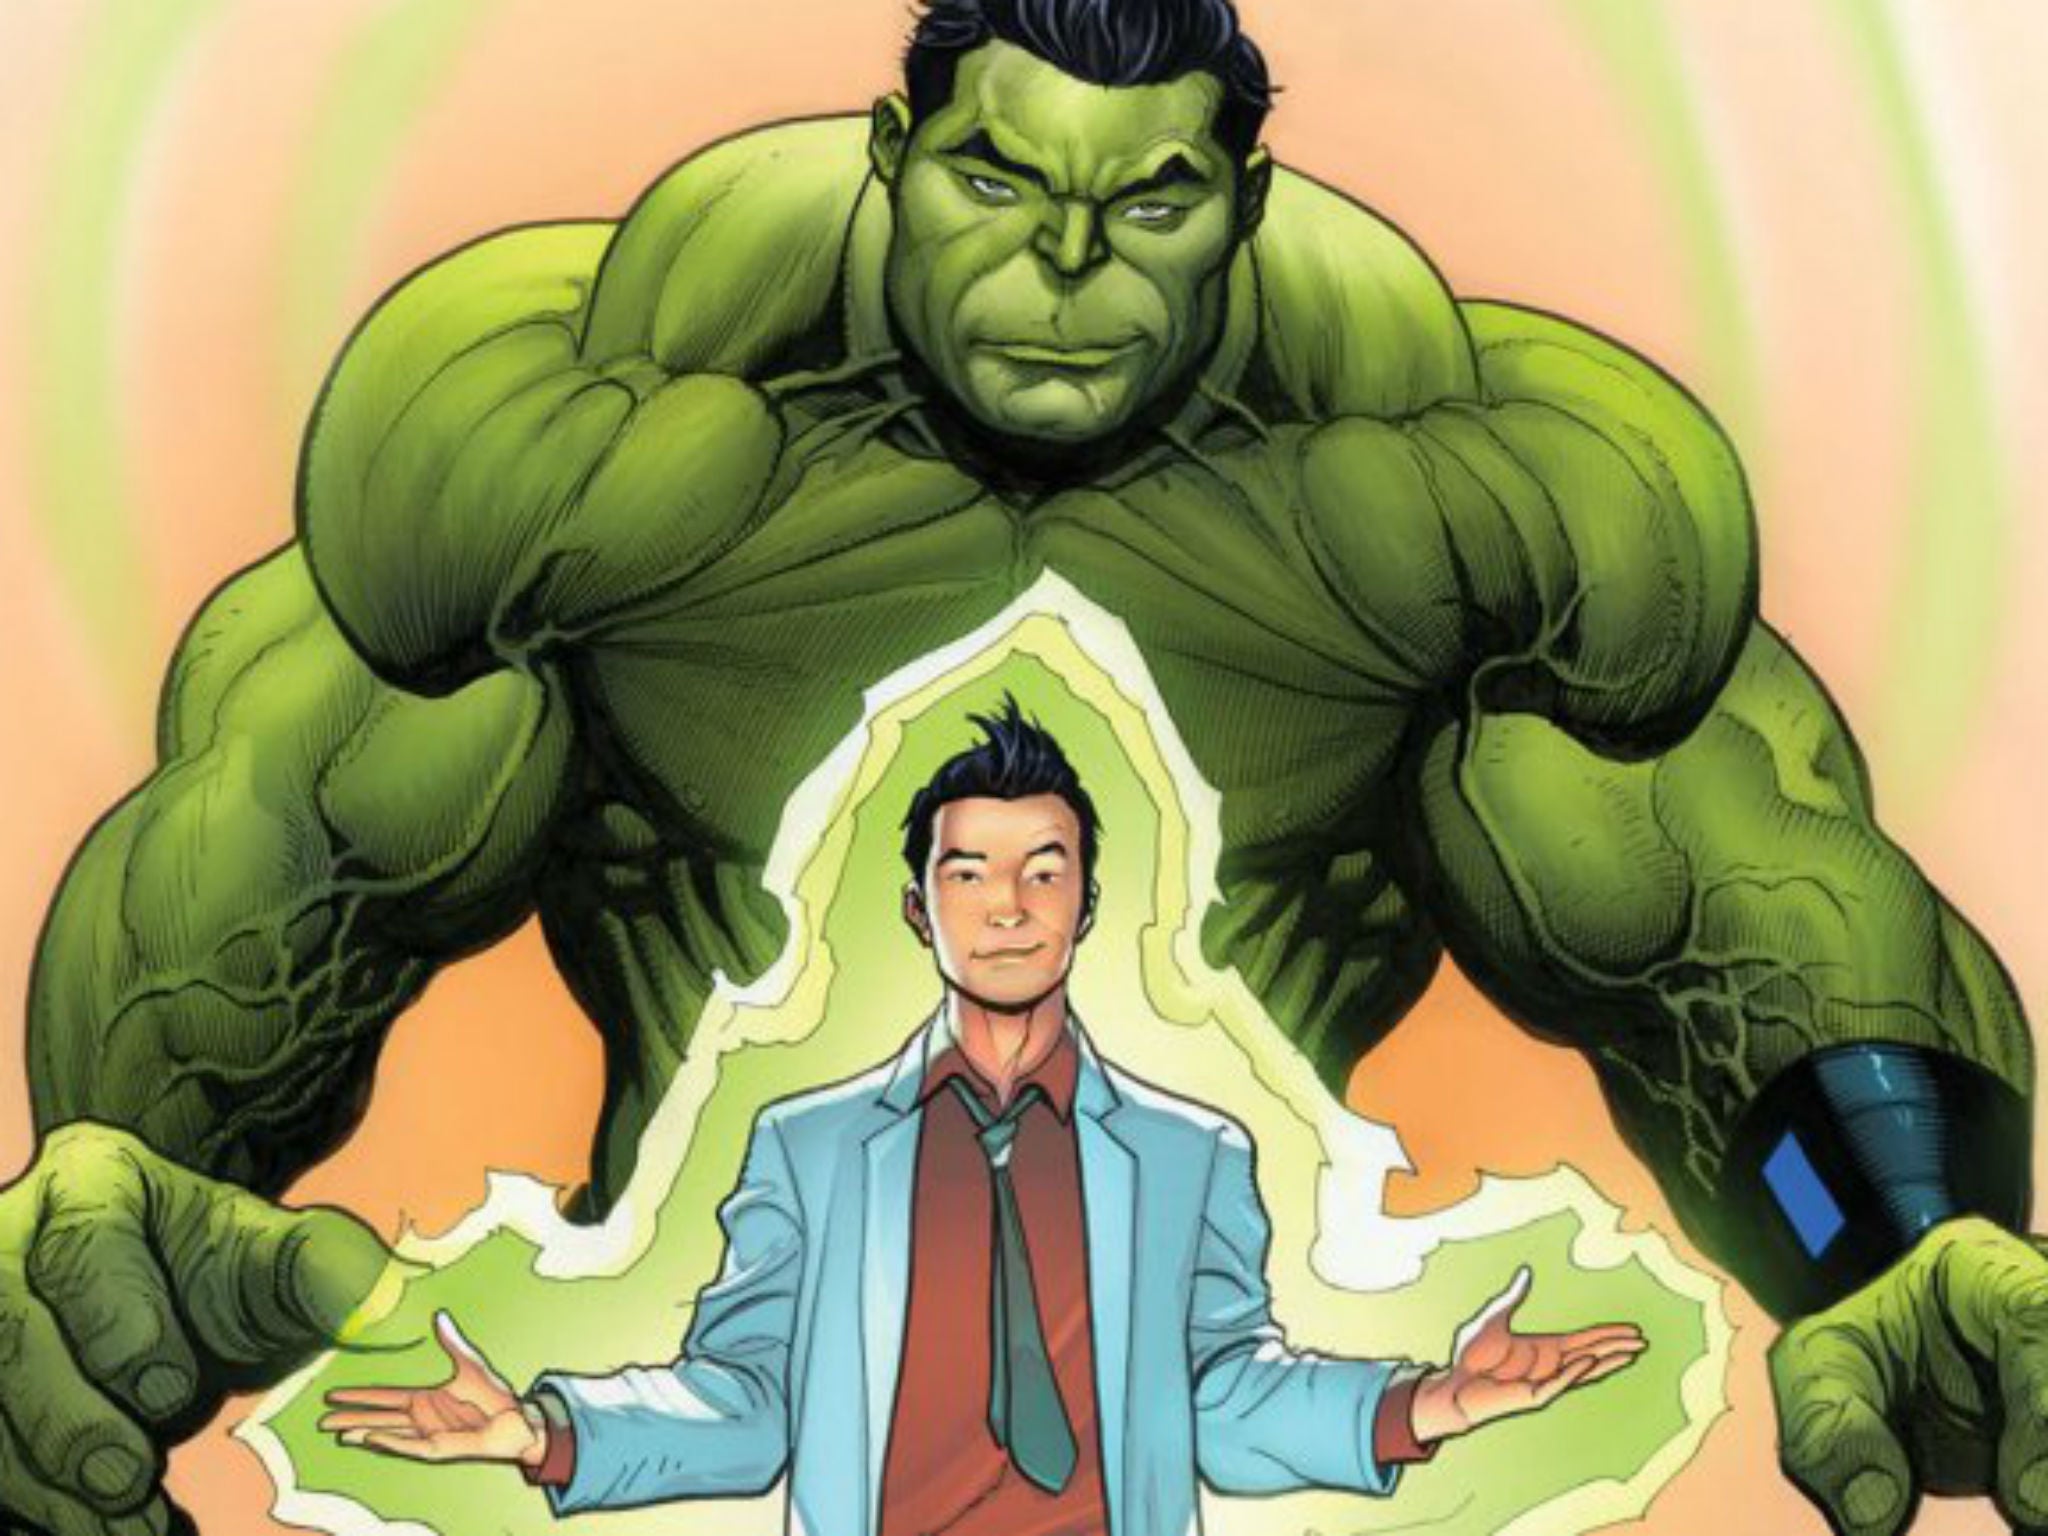 Amadeus Cho will be The Totally Awesome Hulk and replace Bruce Banner